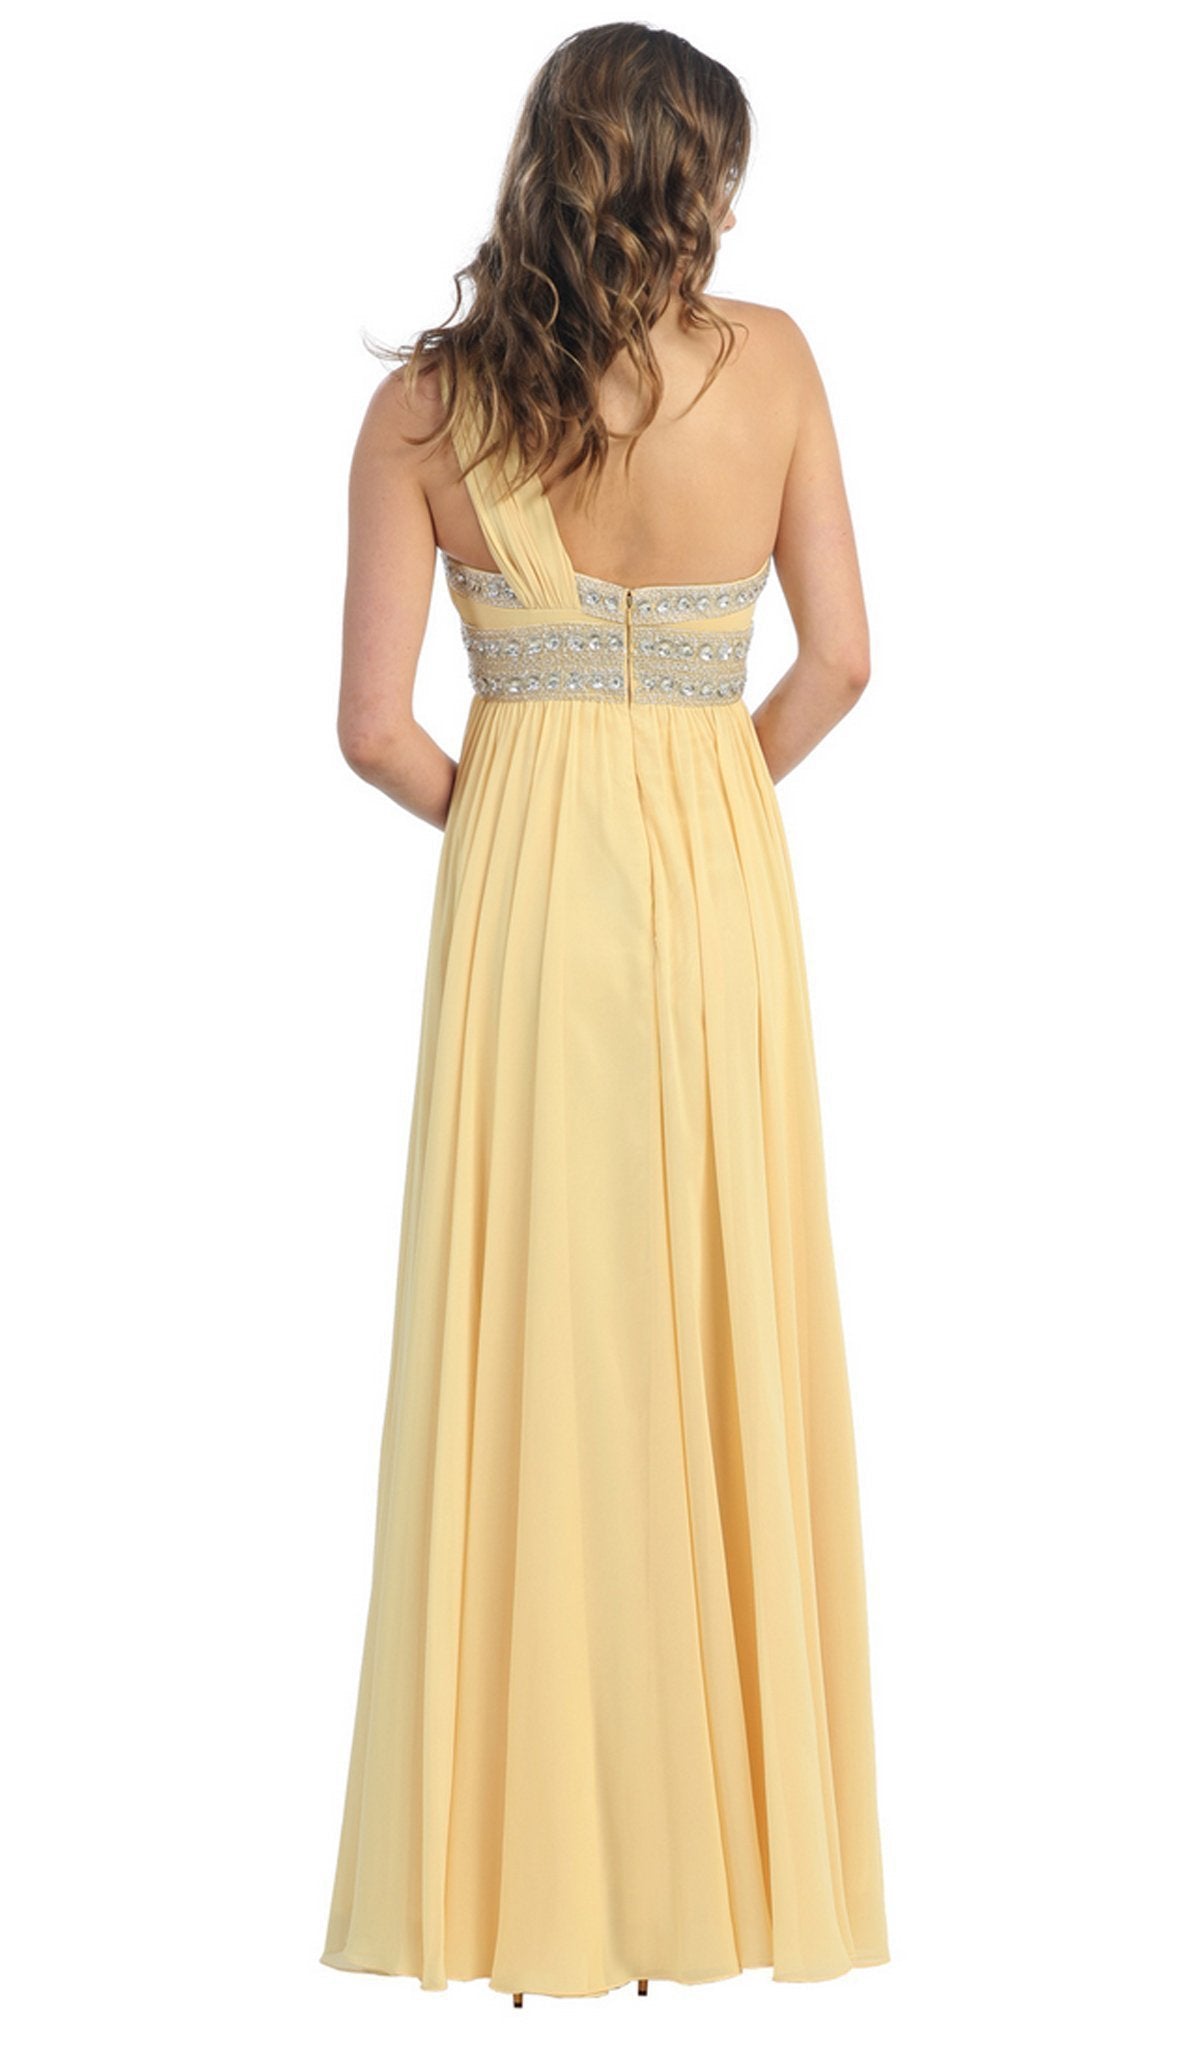 May Queen - MQ748 One Shoulder Strap Bejeweled Straight Neck Chiffon Prom Dress In Orange